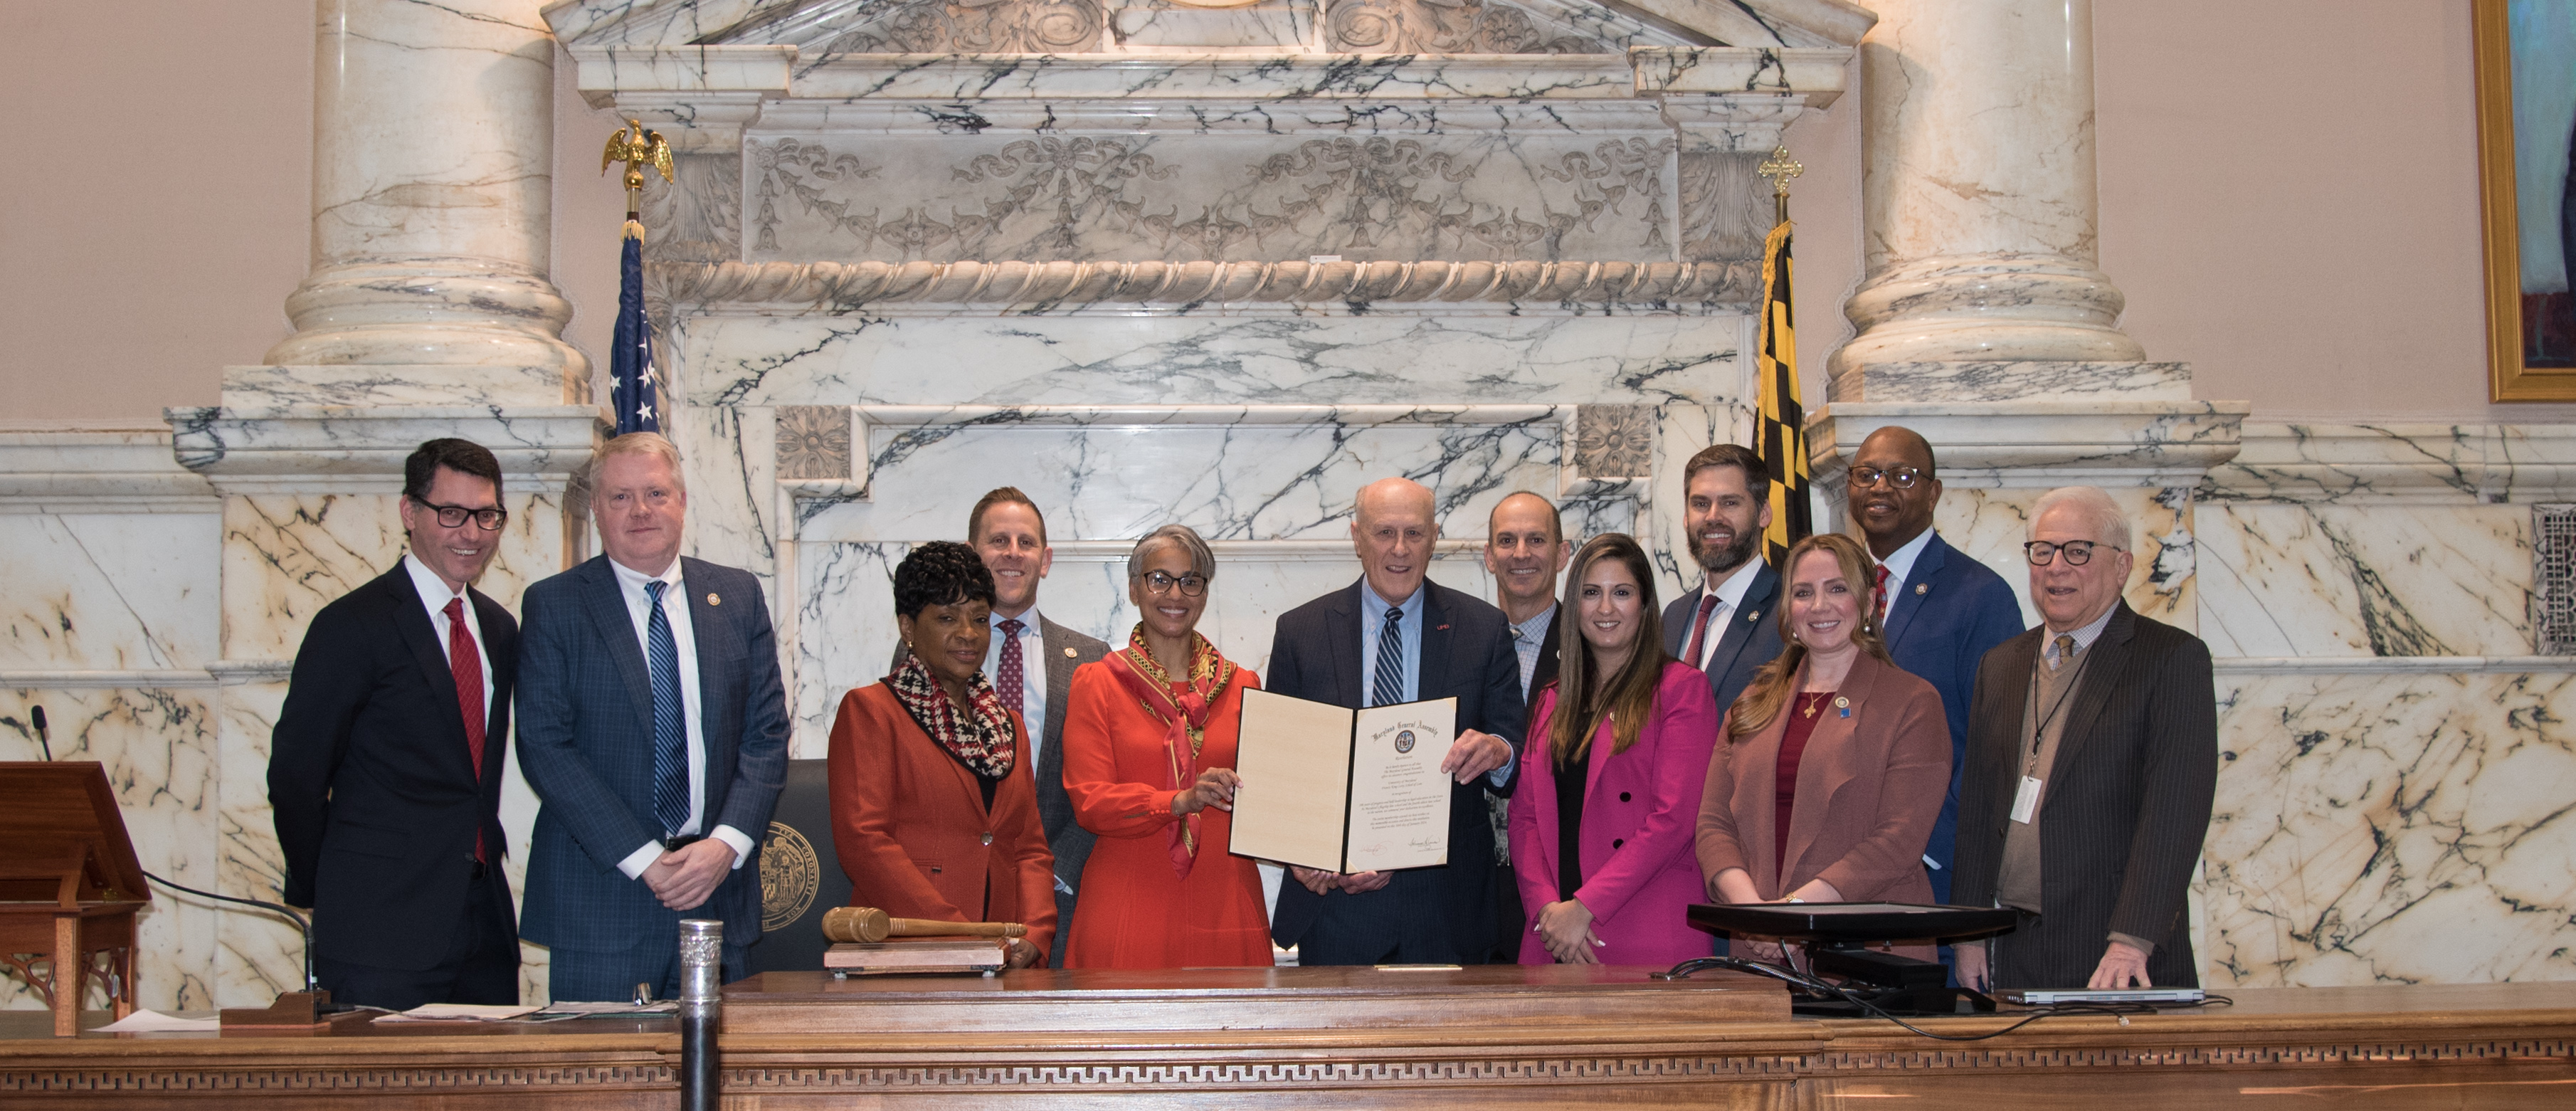 General Assembly honors Maryland Carey Law for 200 years of ‘bold leadership’ 